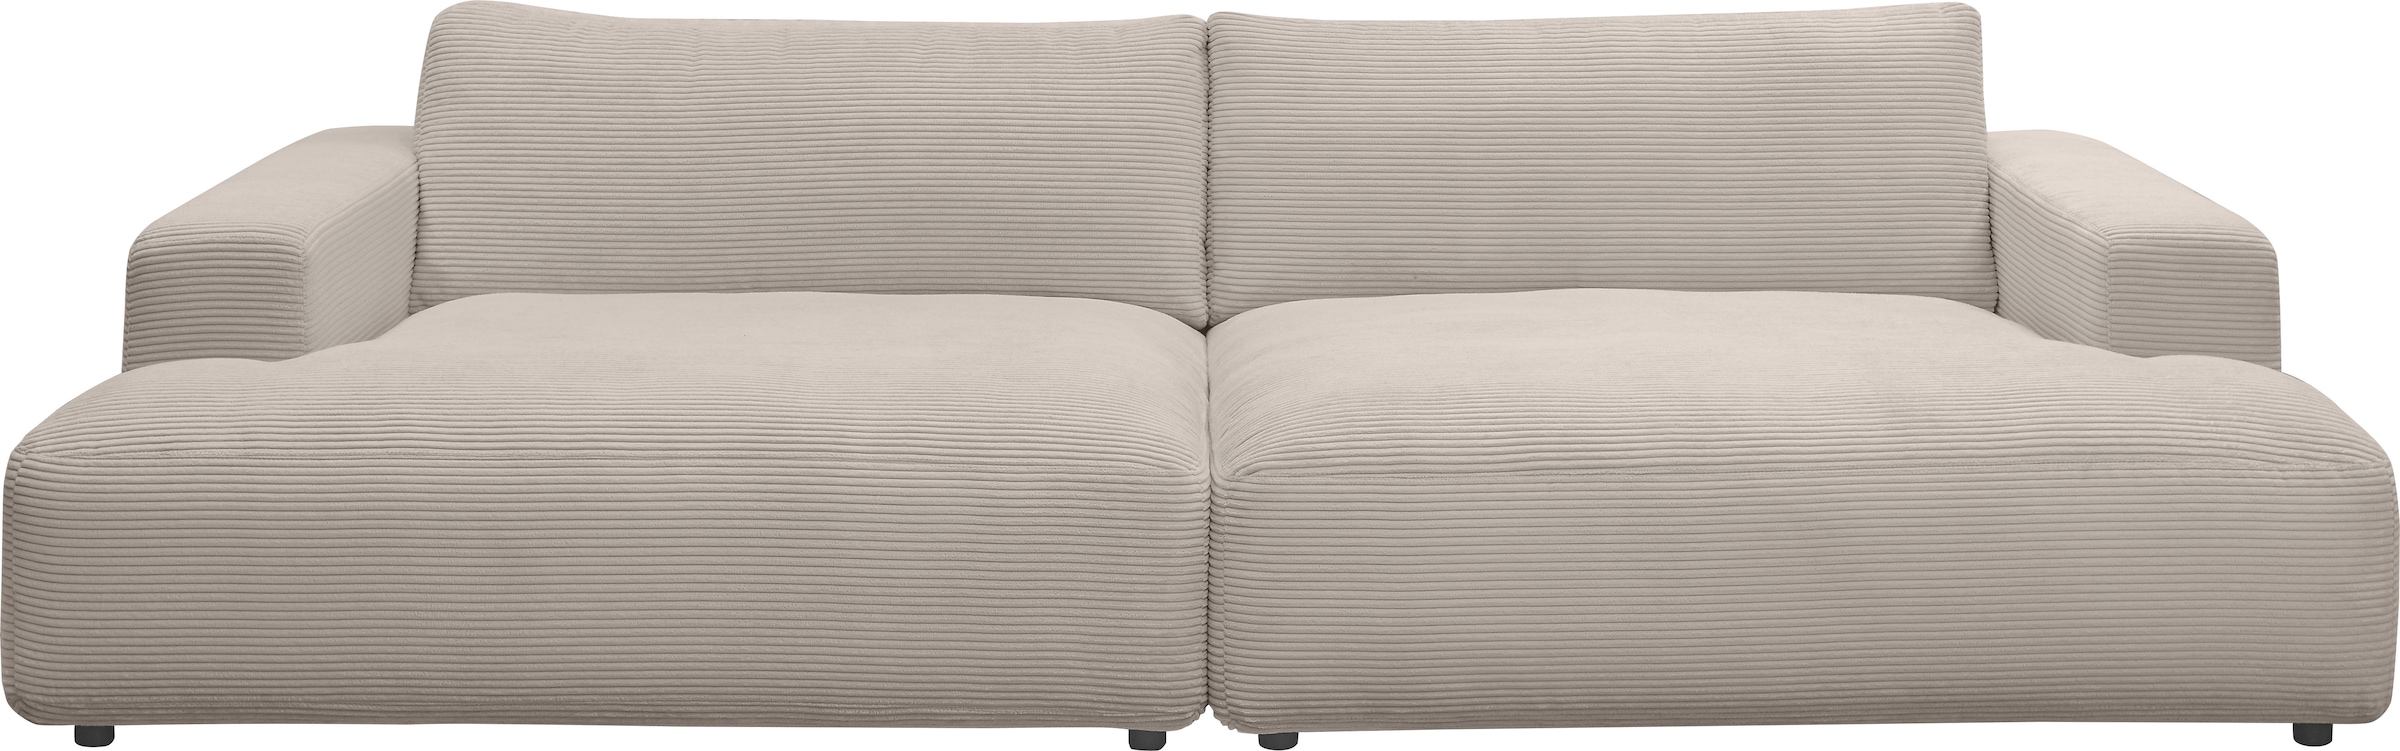 Loungesofa GALLERY by 292 »Lucia«, bequem M Breite kaufen Cord-Bezug, Musterring branded cm